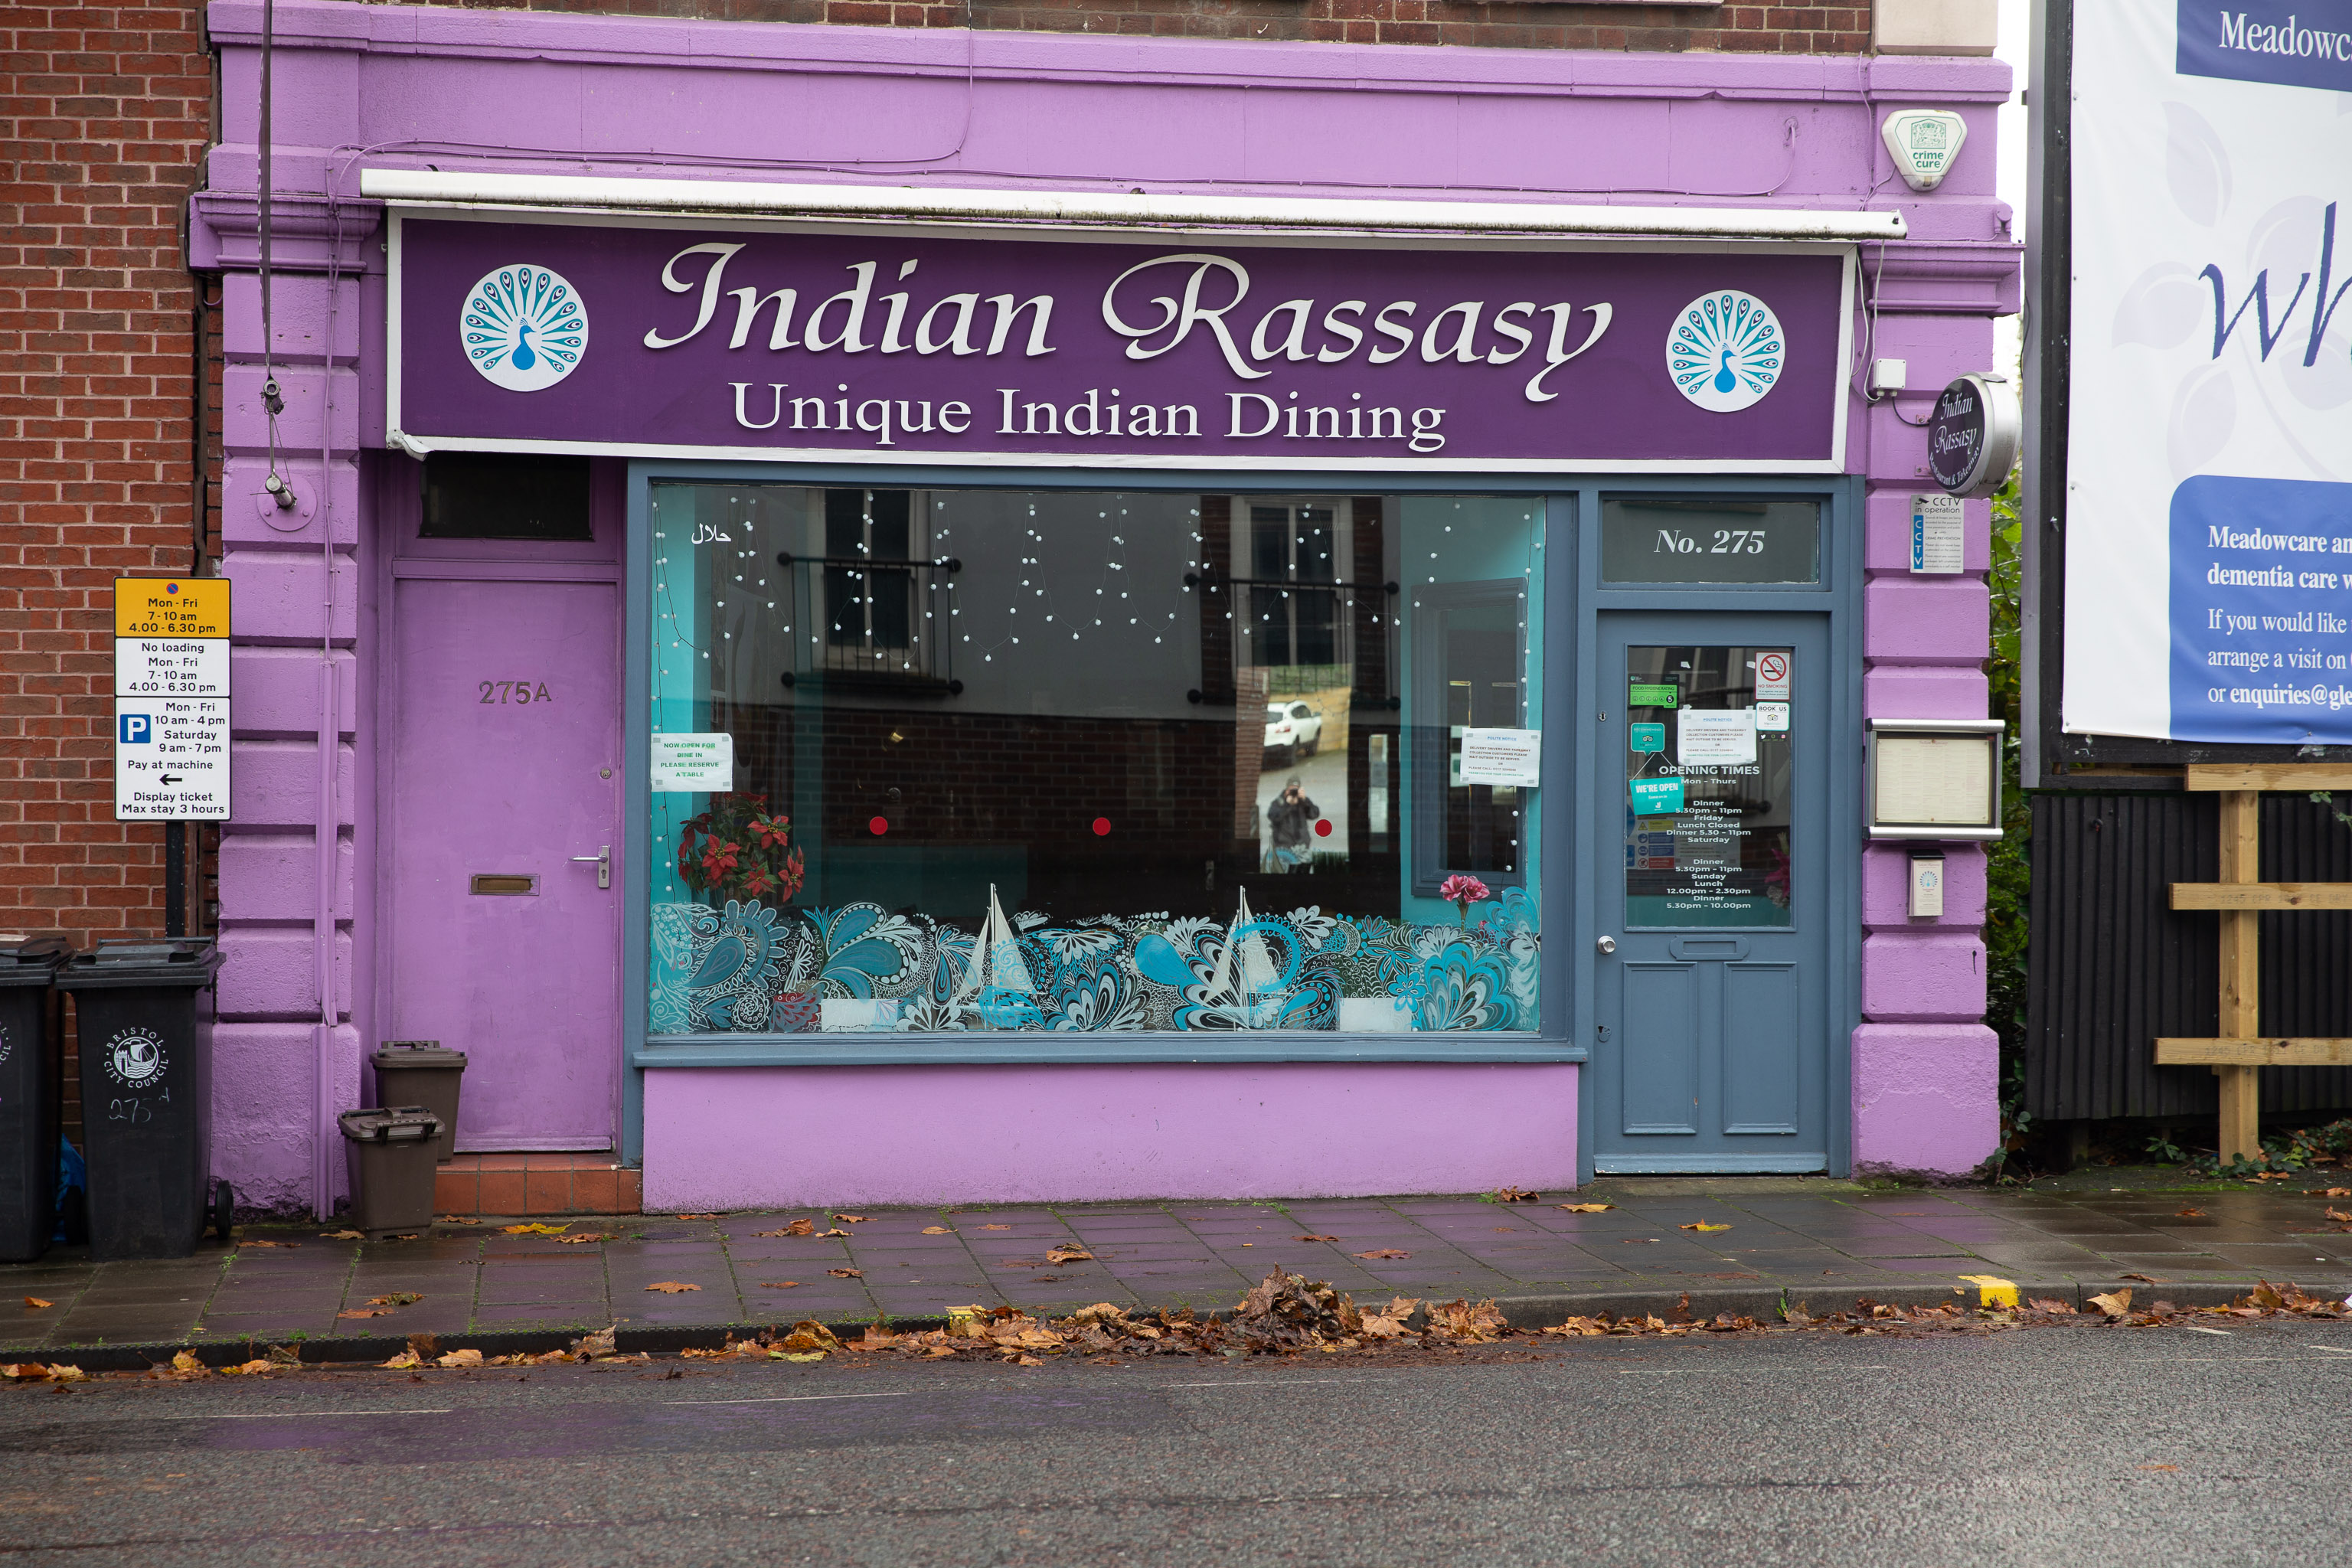 Indian Rassay
As I said in another photo, I've not been in here since it changed from being a Persian restaurant called Shiraz. I hear it's very good, but I didn...